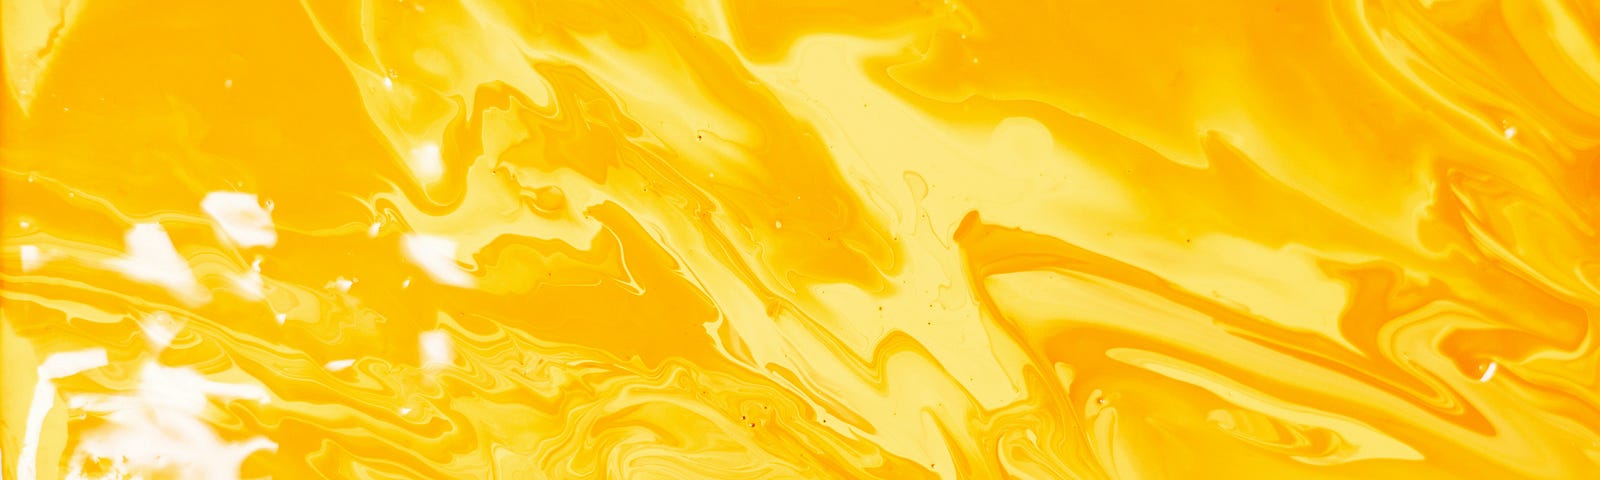 A messy splash of yellow paint.